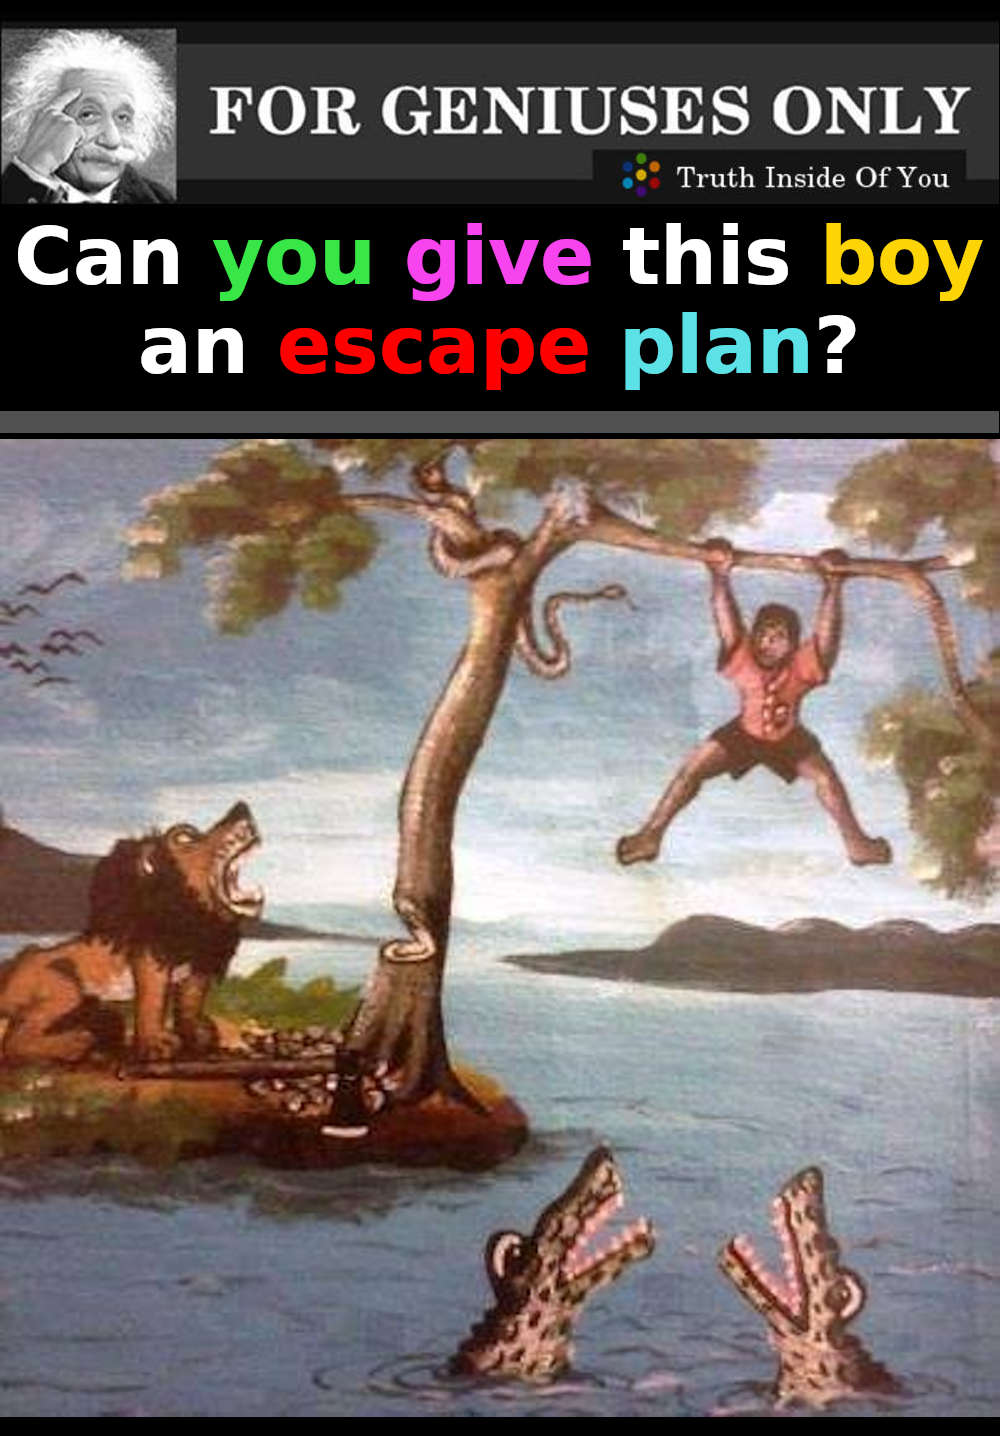 Can you give this boy an escape plan?